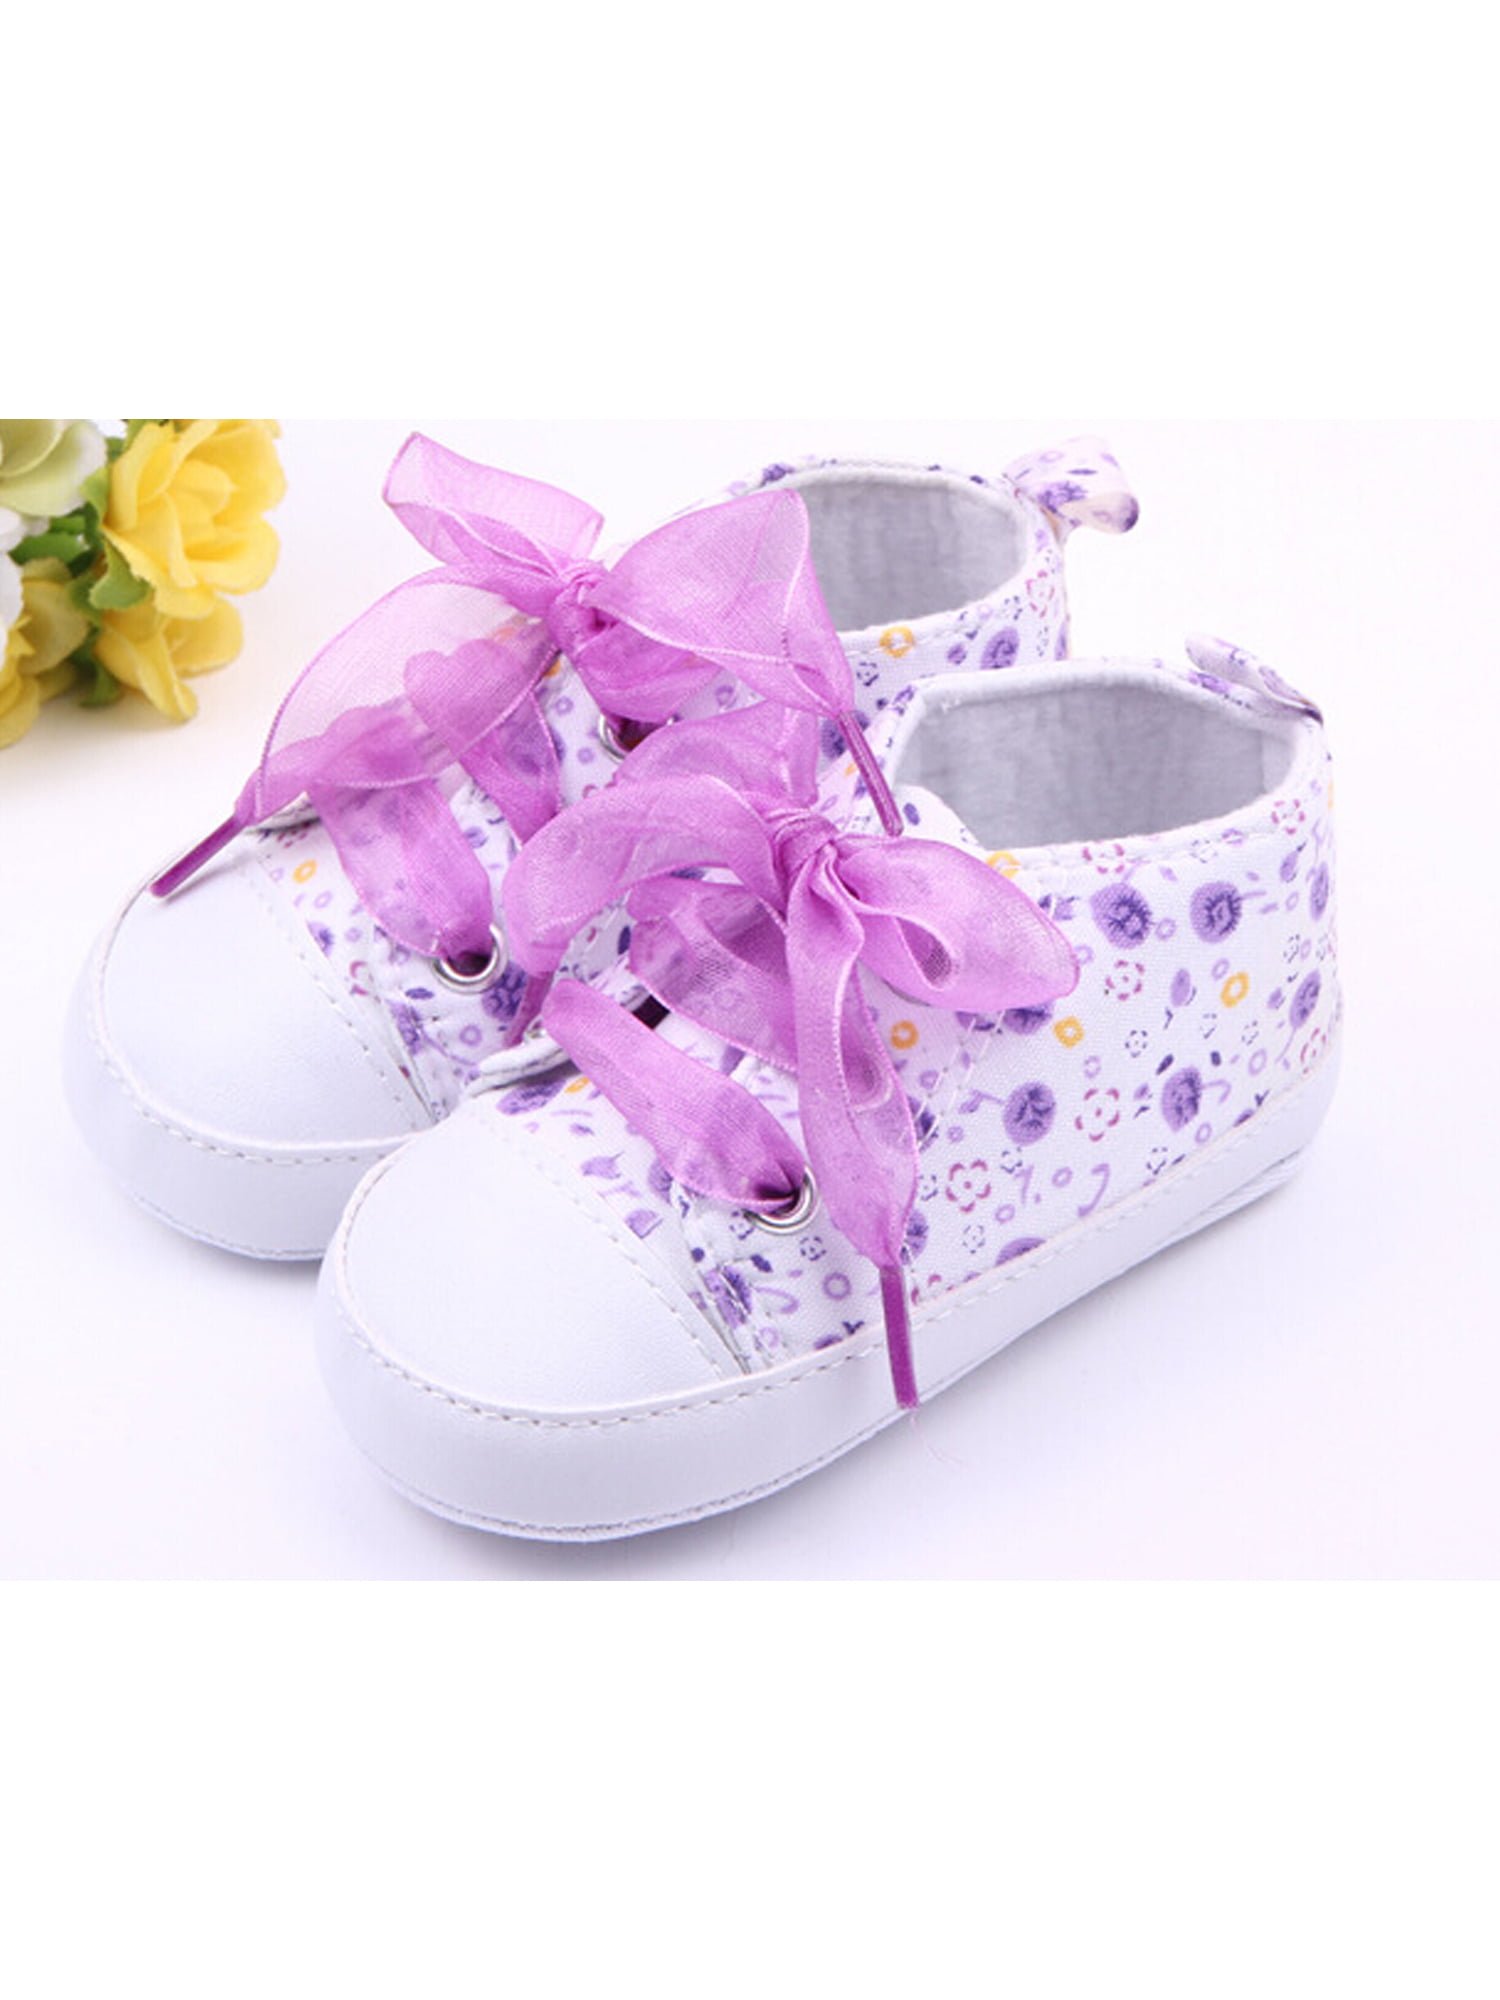 Meihuida - Fashion Toddler Baby Girl Walking Shoes Small Floral Baby